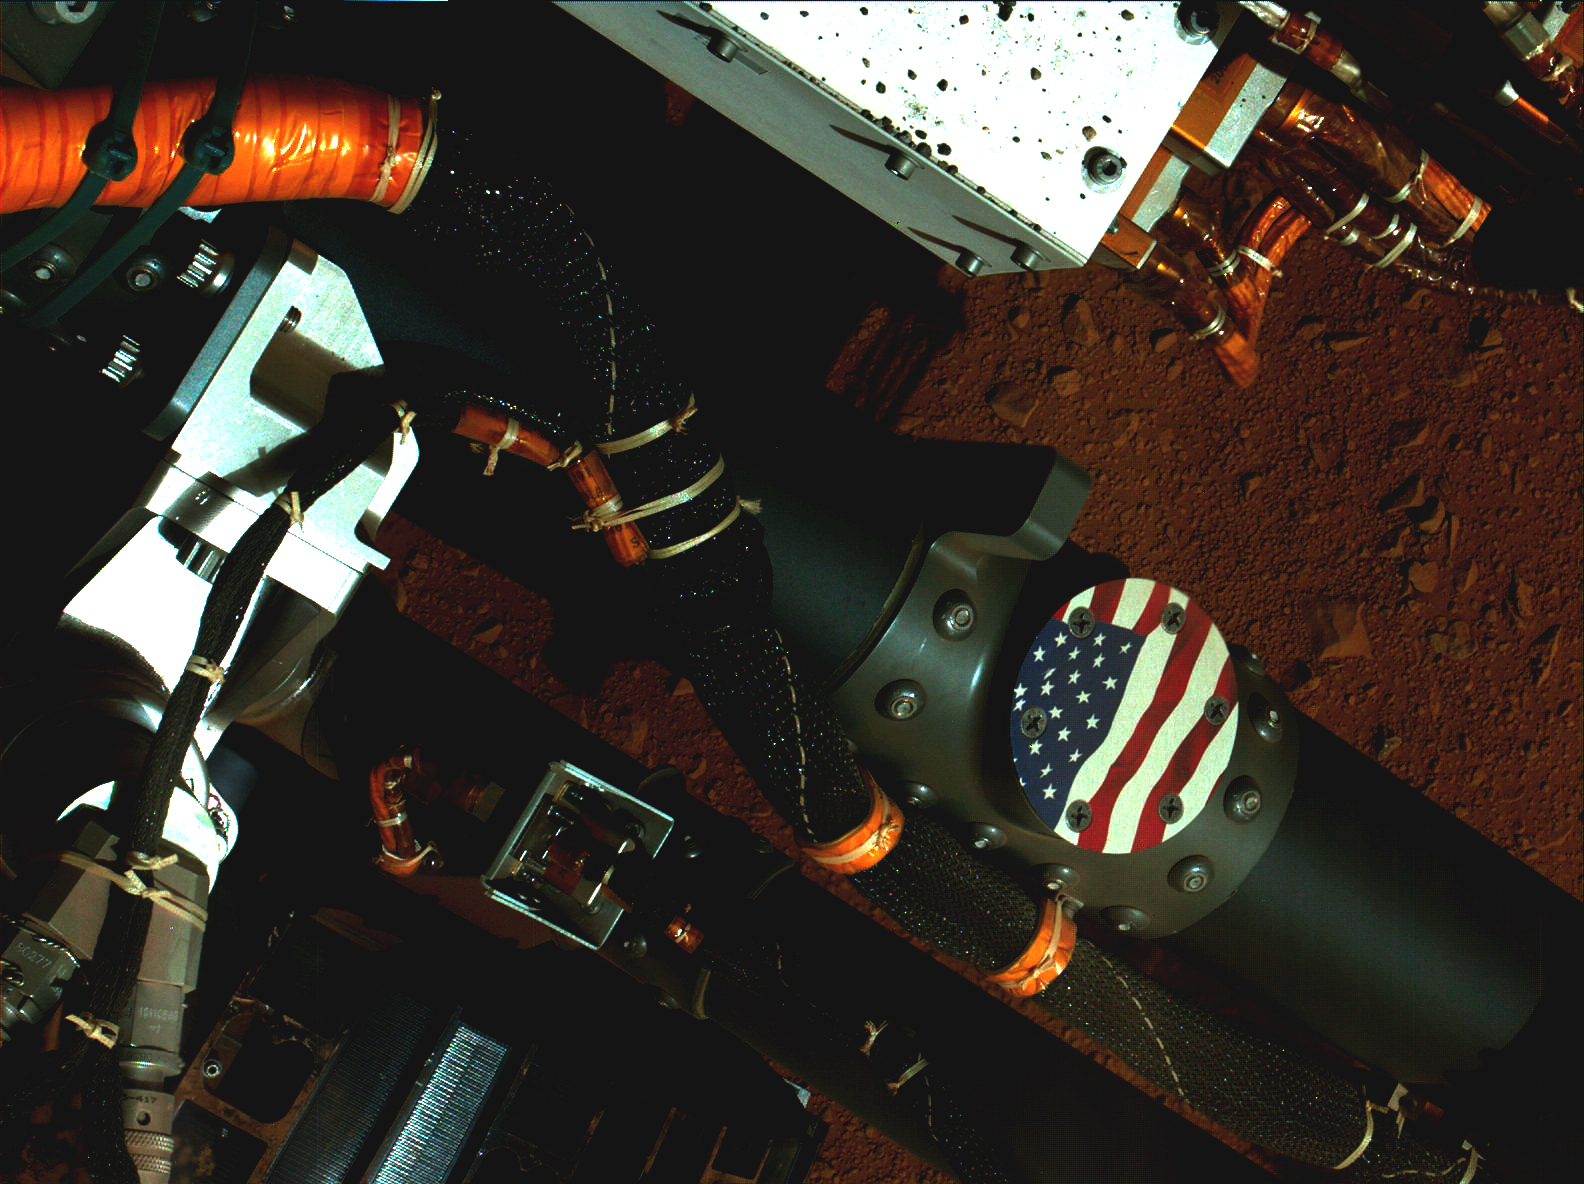 u.s. flag visible on hardware on mars rover